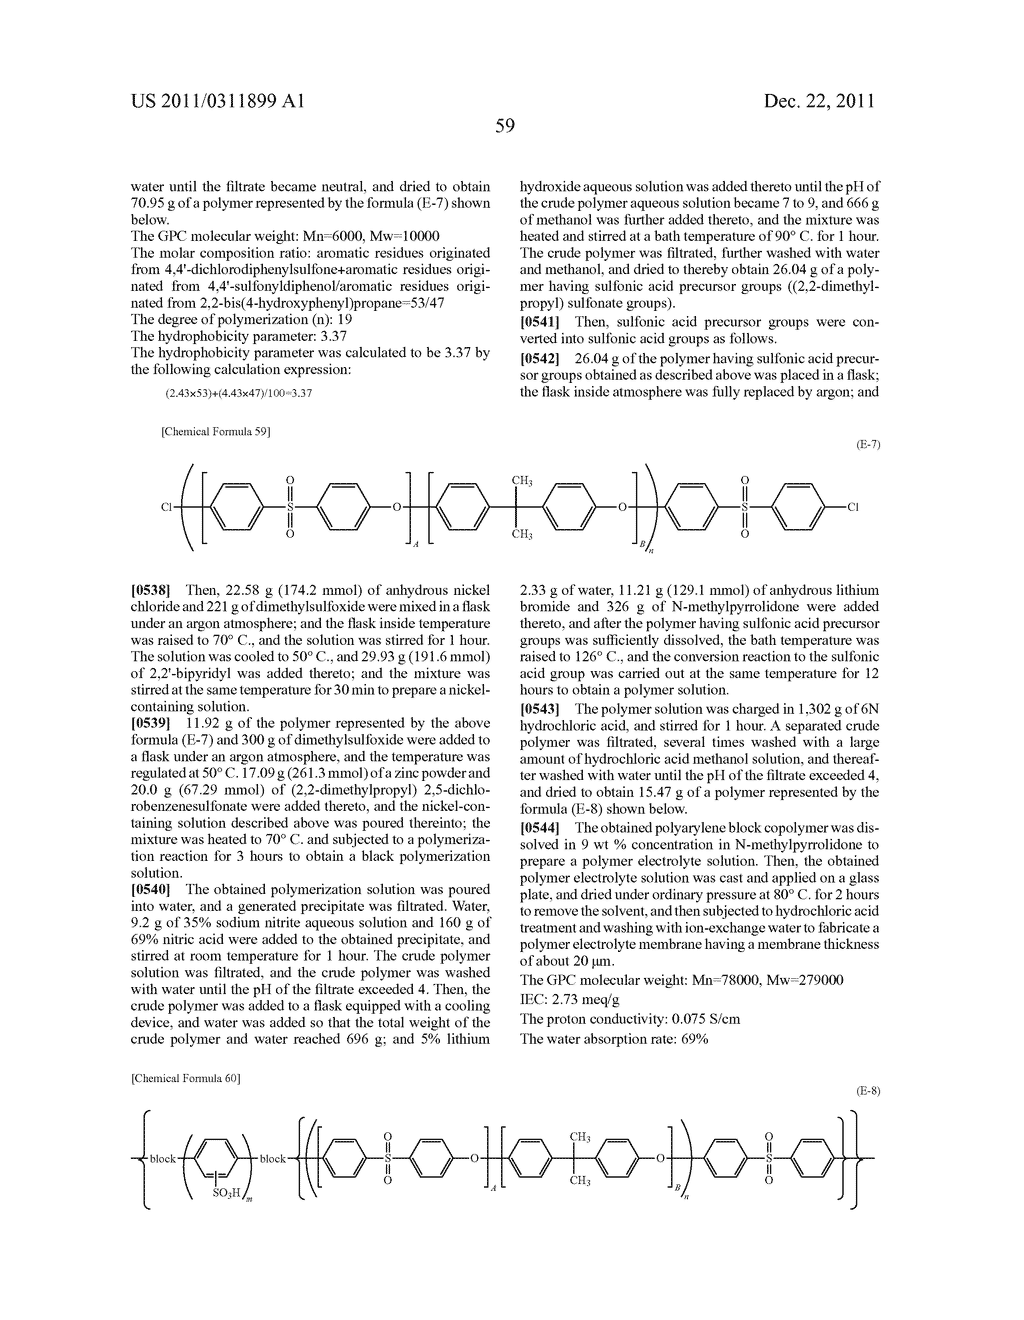 POLYMER, POLYARYLENE BLOCK COPOLYMER, POLYELECTROLYTE, POLYELECTROLYTE     MEMBRANE, AND FUEL CELL - diagram, schematic, and image 61